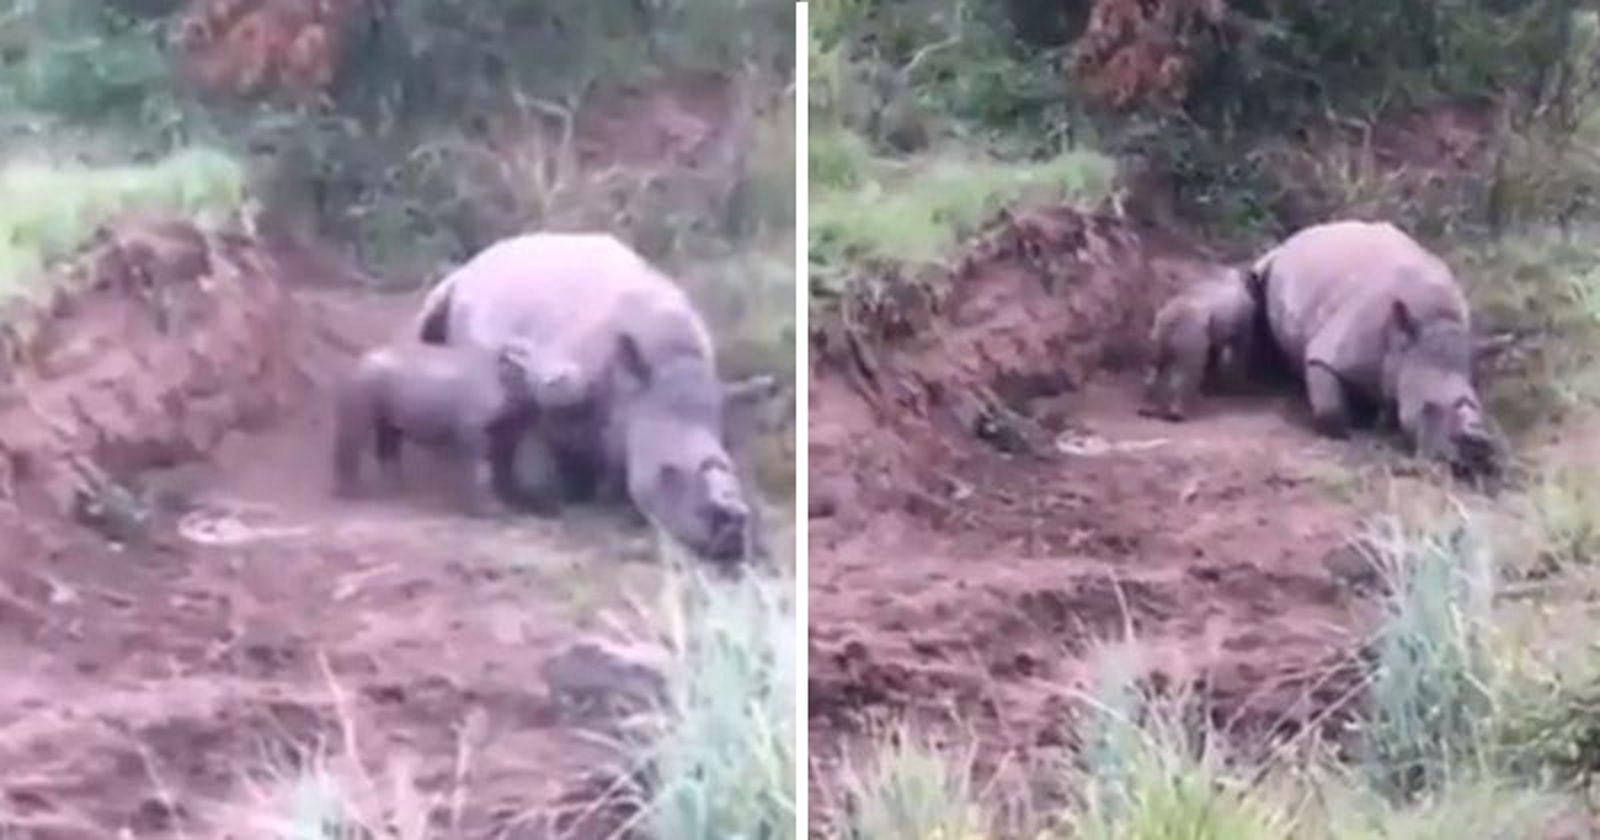 Heartbreaking Video: Baby Rhino Trying To Wake Its Dead Mom, Killed By Poachers